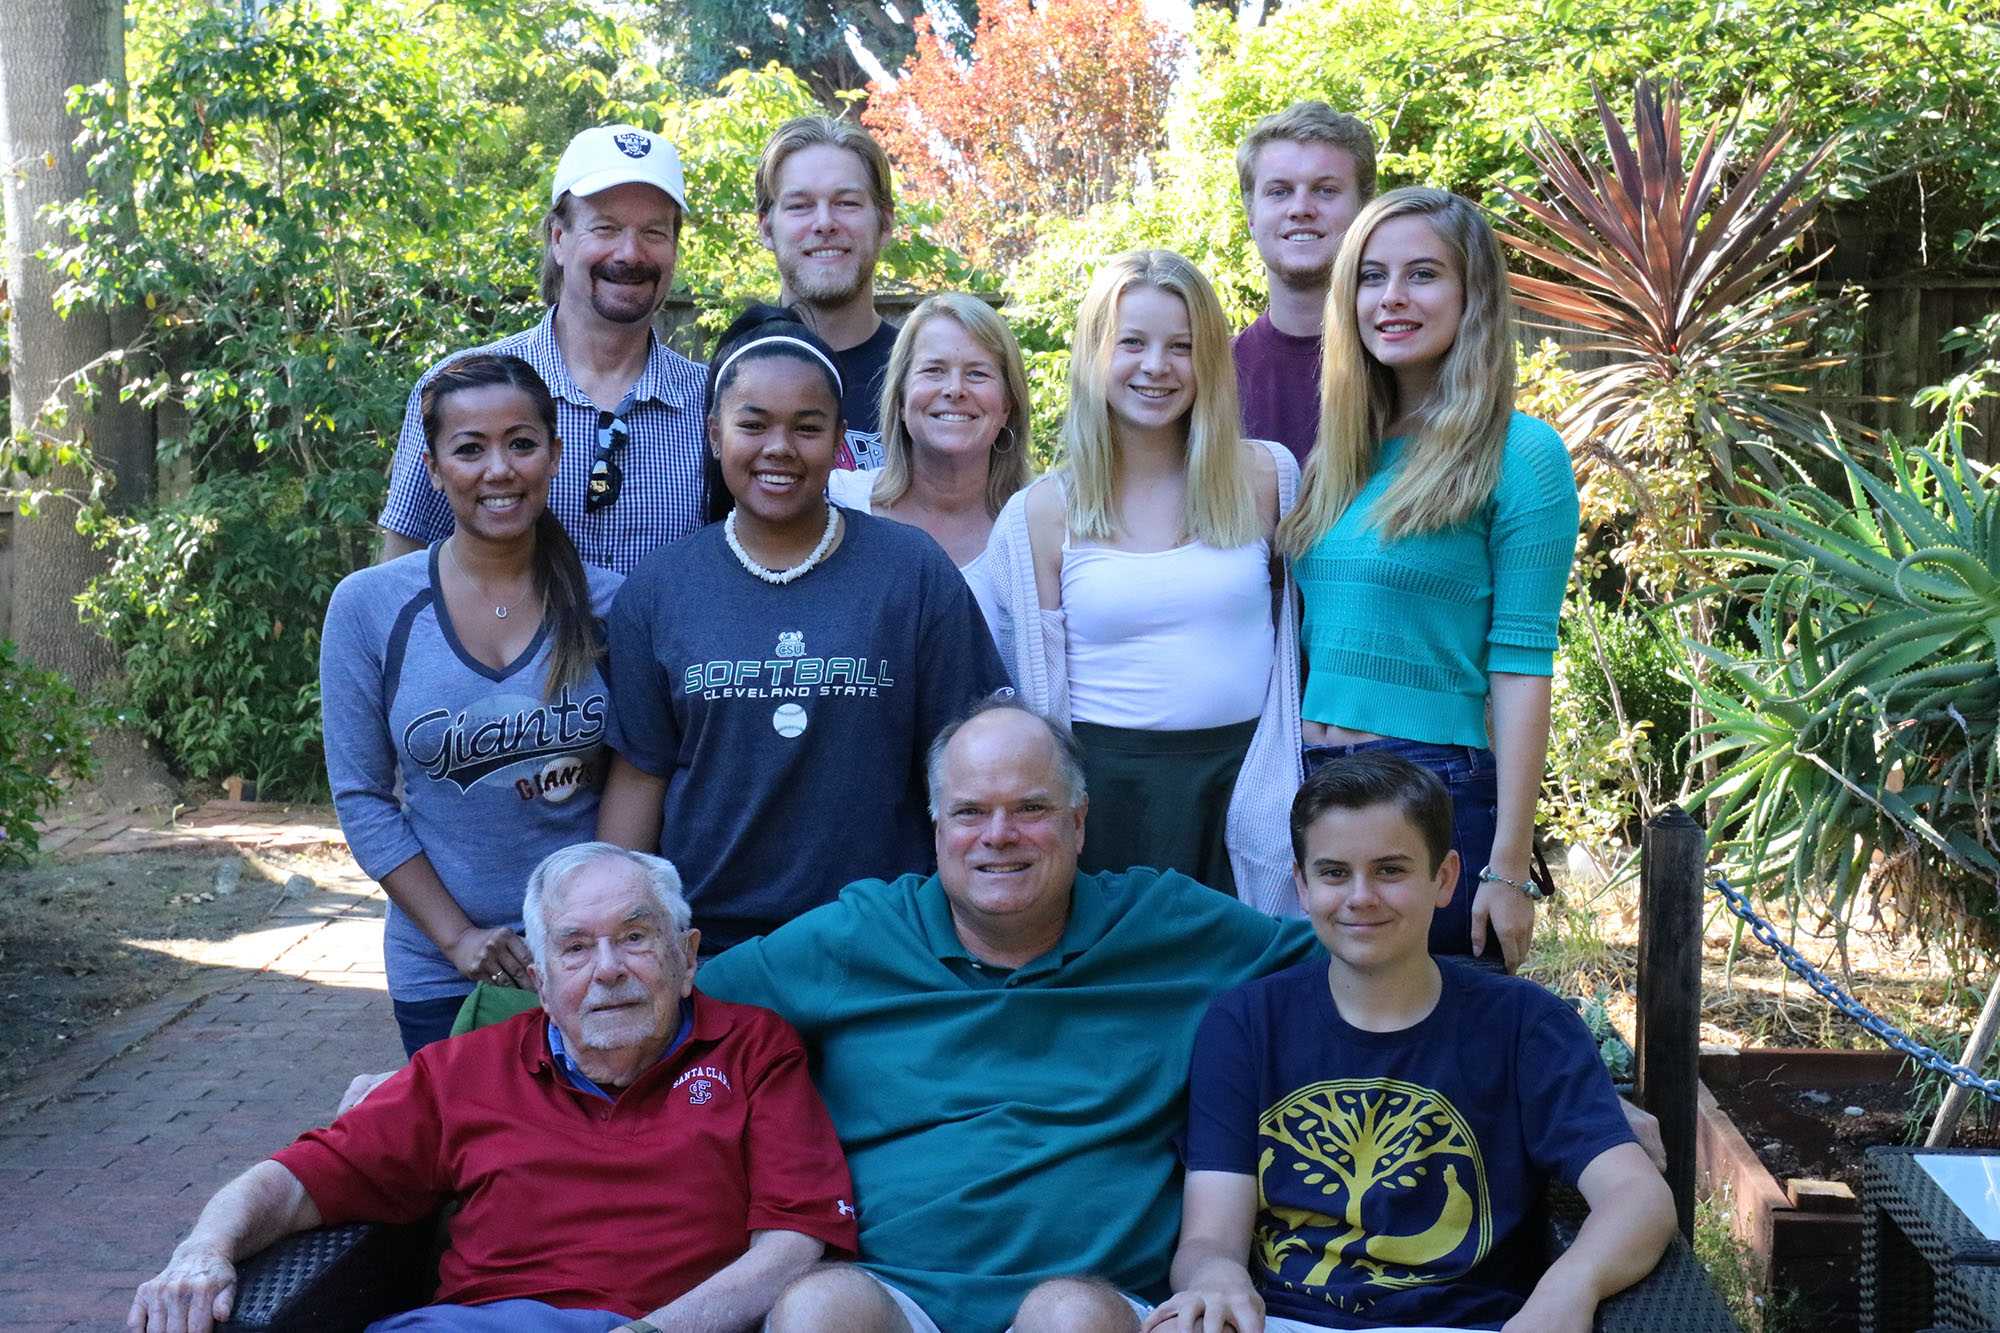 The Swezey family comes together for a family barbeque on labor day. Top row from left: Matthew Fogarty, Drake Swezey, Kirk Swezey. Middle row from left: Sophie Swezey, Michaela Fogarty, Megan Fogarty, Dhesya Swezey, Weinda Swezey. Bottom row from left: Kyle Swezey, Rory Swezey, Lawrence Swezey. Photo by Sophie Nakai.